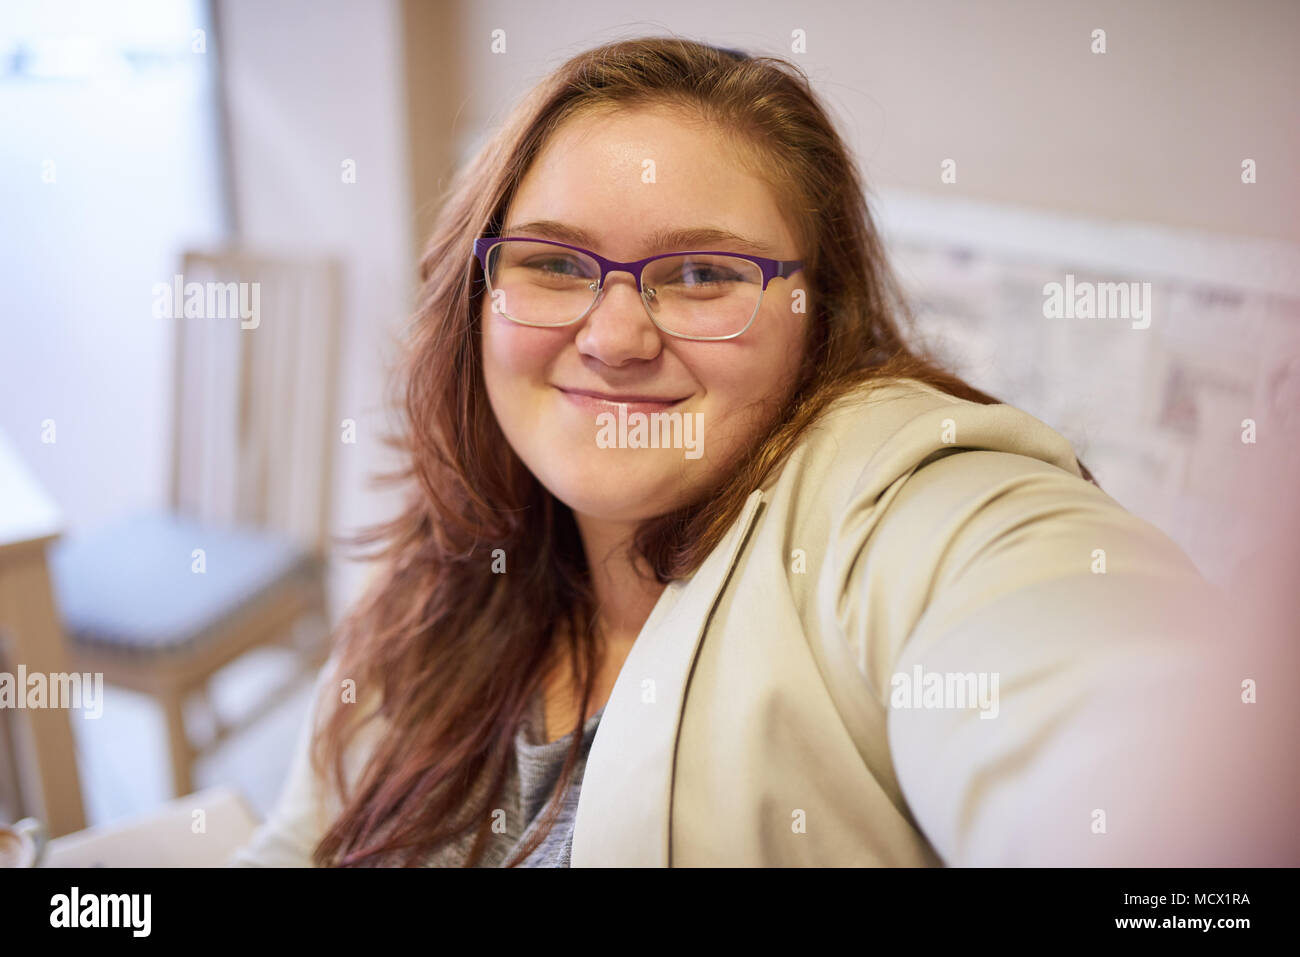 Slightly overweight beautiful young caucasian woman taking a picture of herself while wearing formal clothing and glasses in a cafe to start her day off with a smile and positive energy. Stock Photo